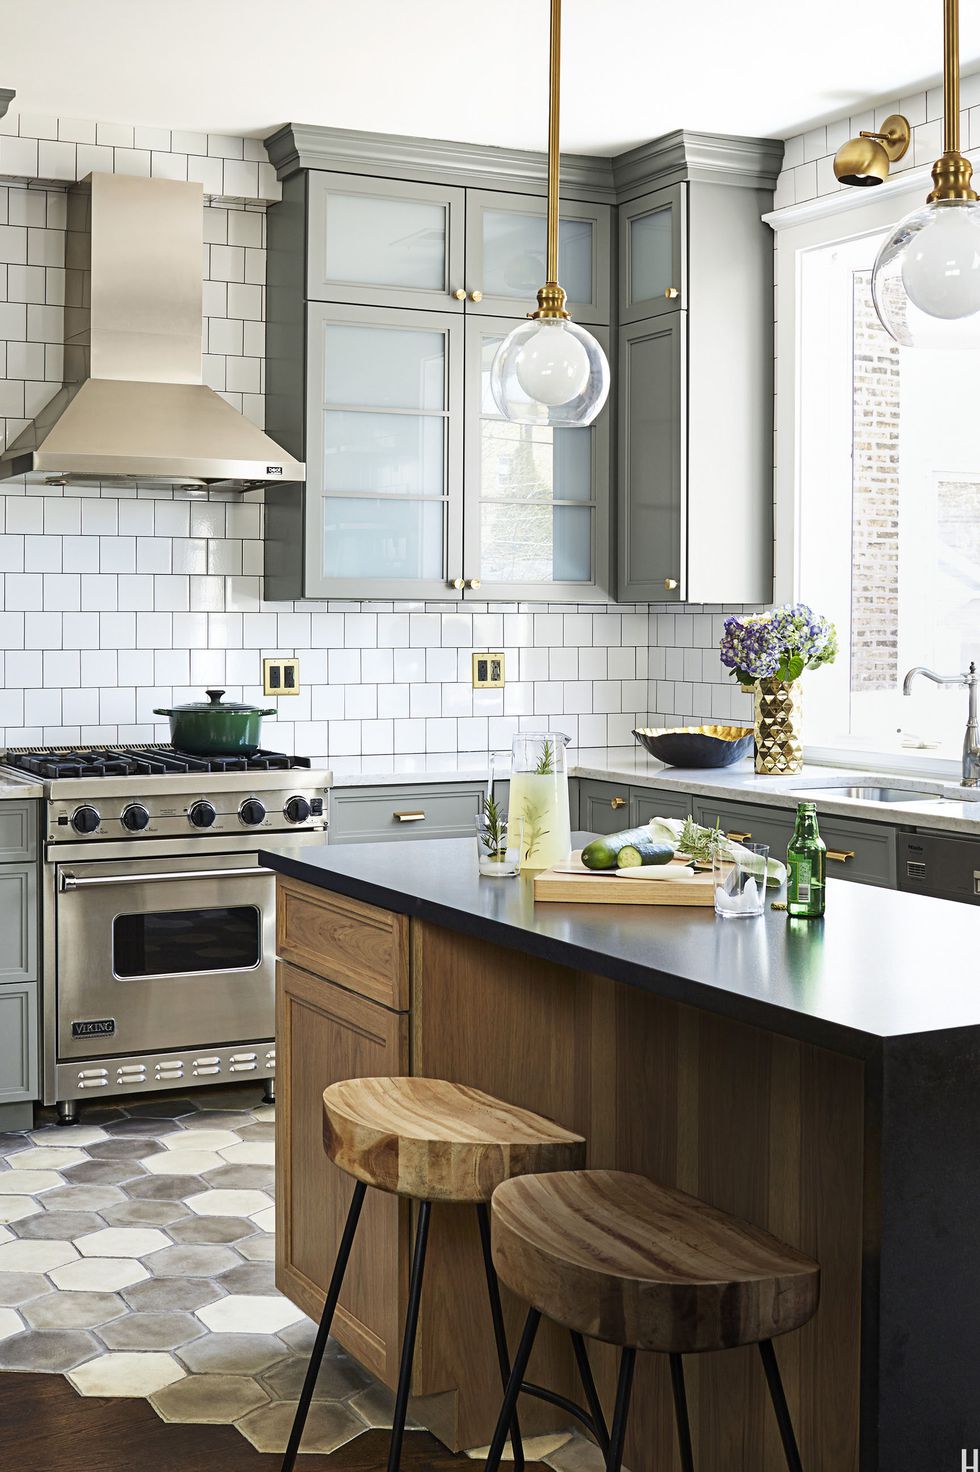 5 Kitchen Lighting Ideas To Transform Your Home